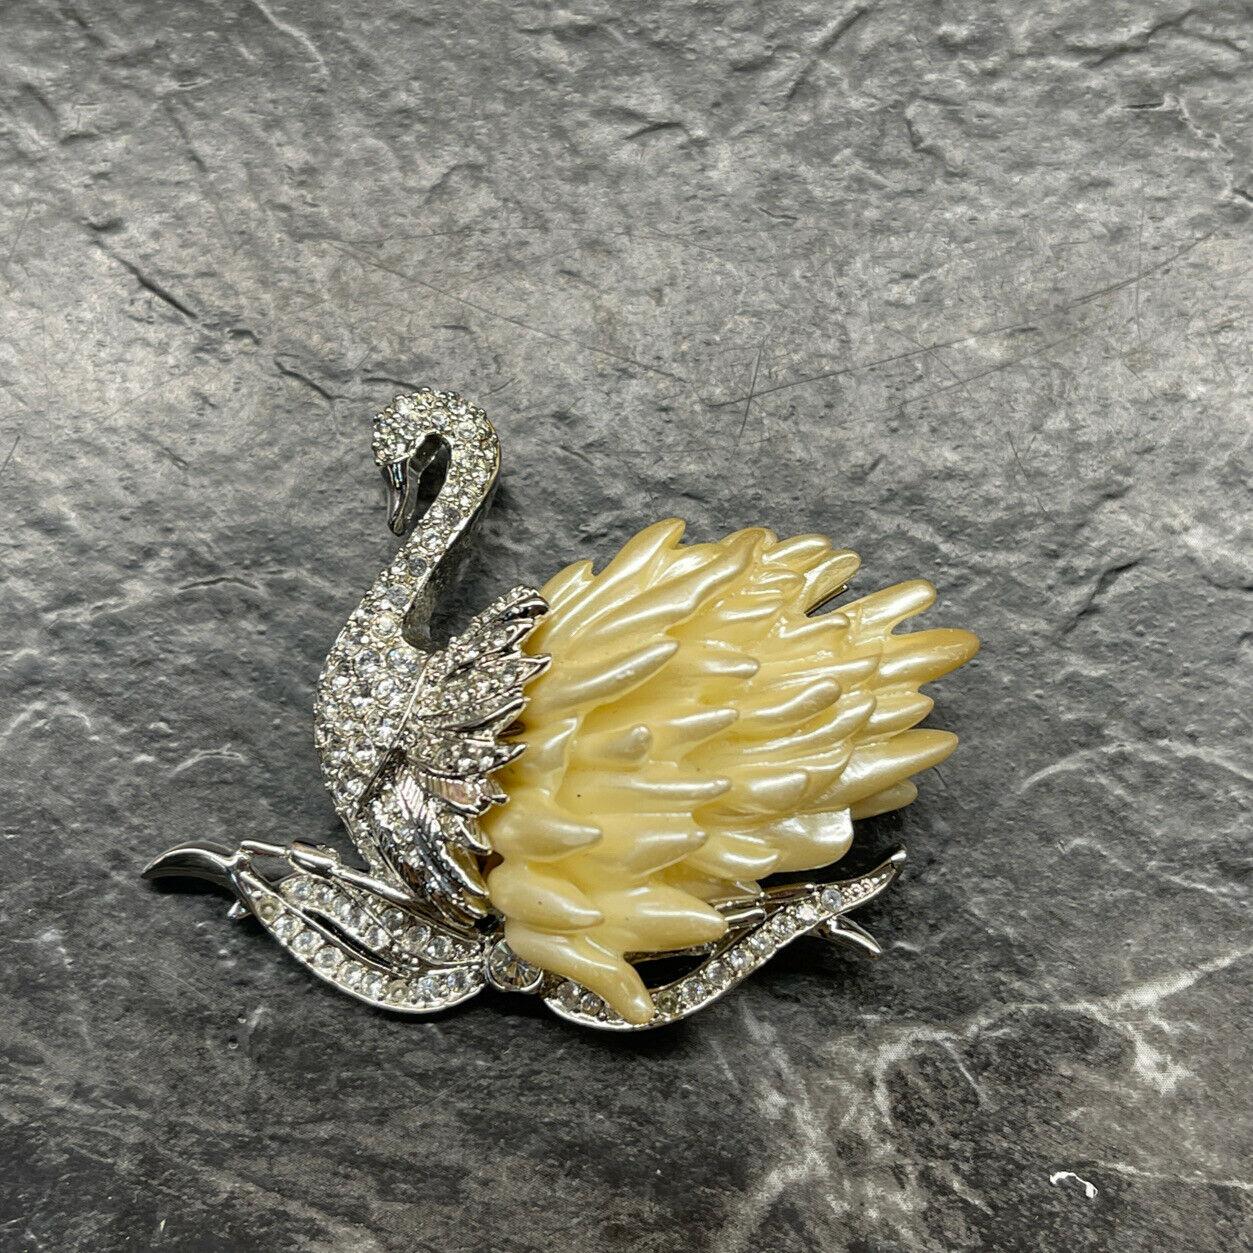 Simply Beautiful! Designer Nolan Miller Signed Vintage Brooch featuring a Swimming Swan encrusted with Sparkling Crystals and Faux Pearl Feathers. Approx. 2” tall x 2” w. Original Box. More Beautiful in Real time! A sure to be admired Treasure